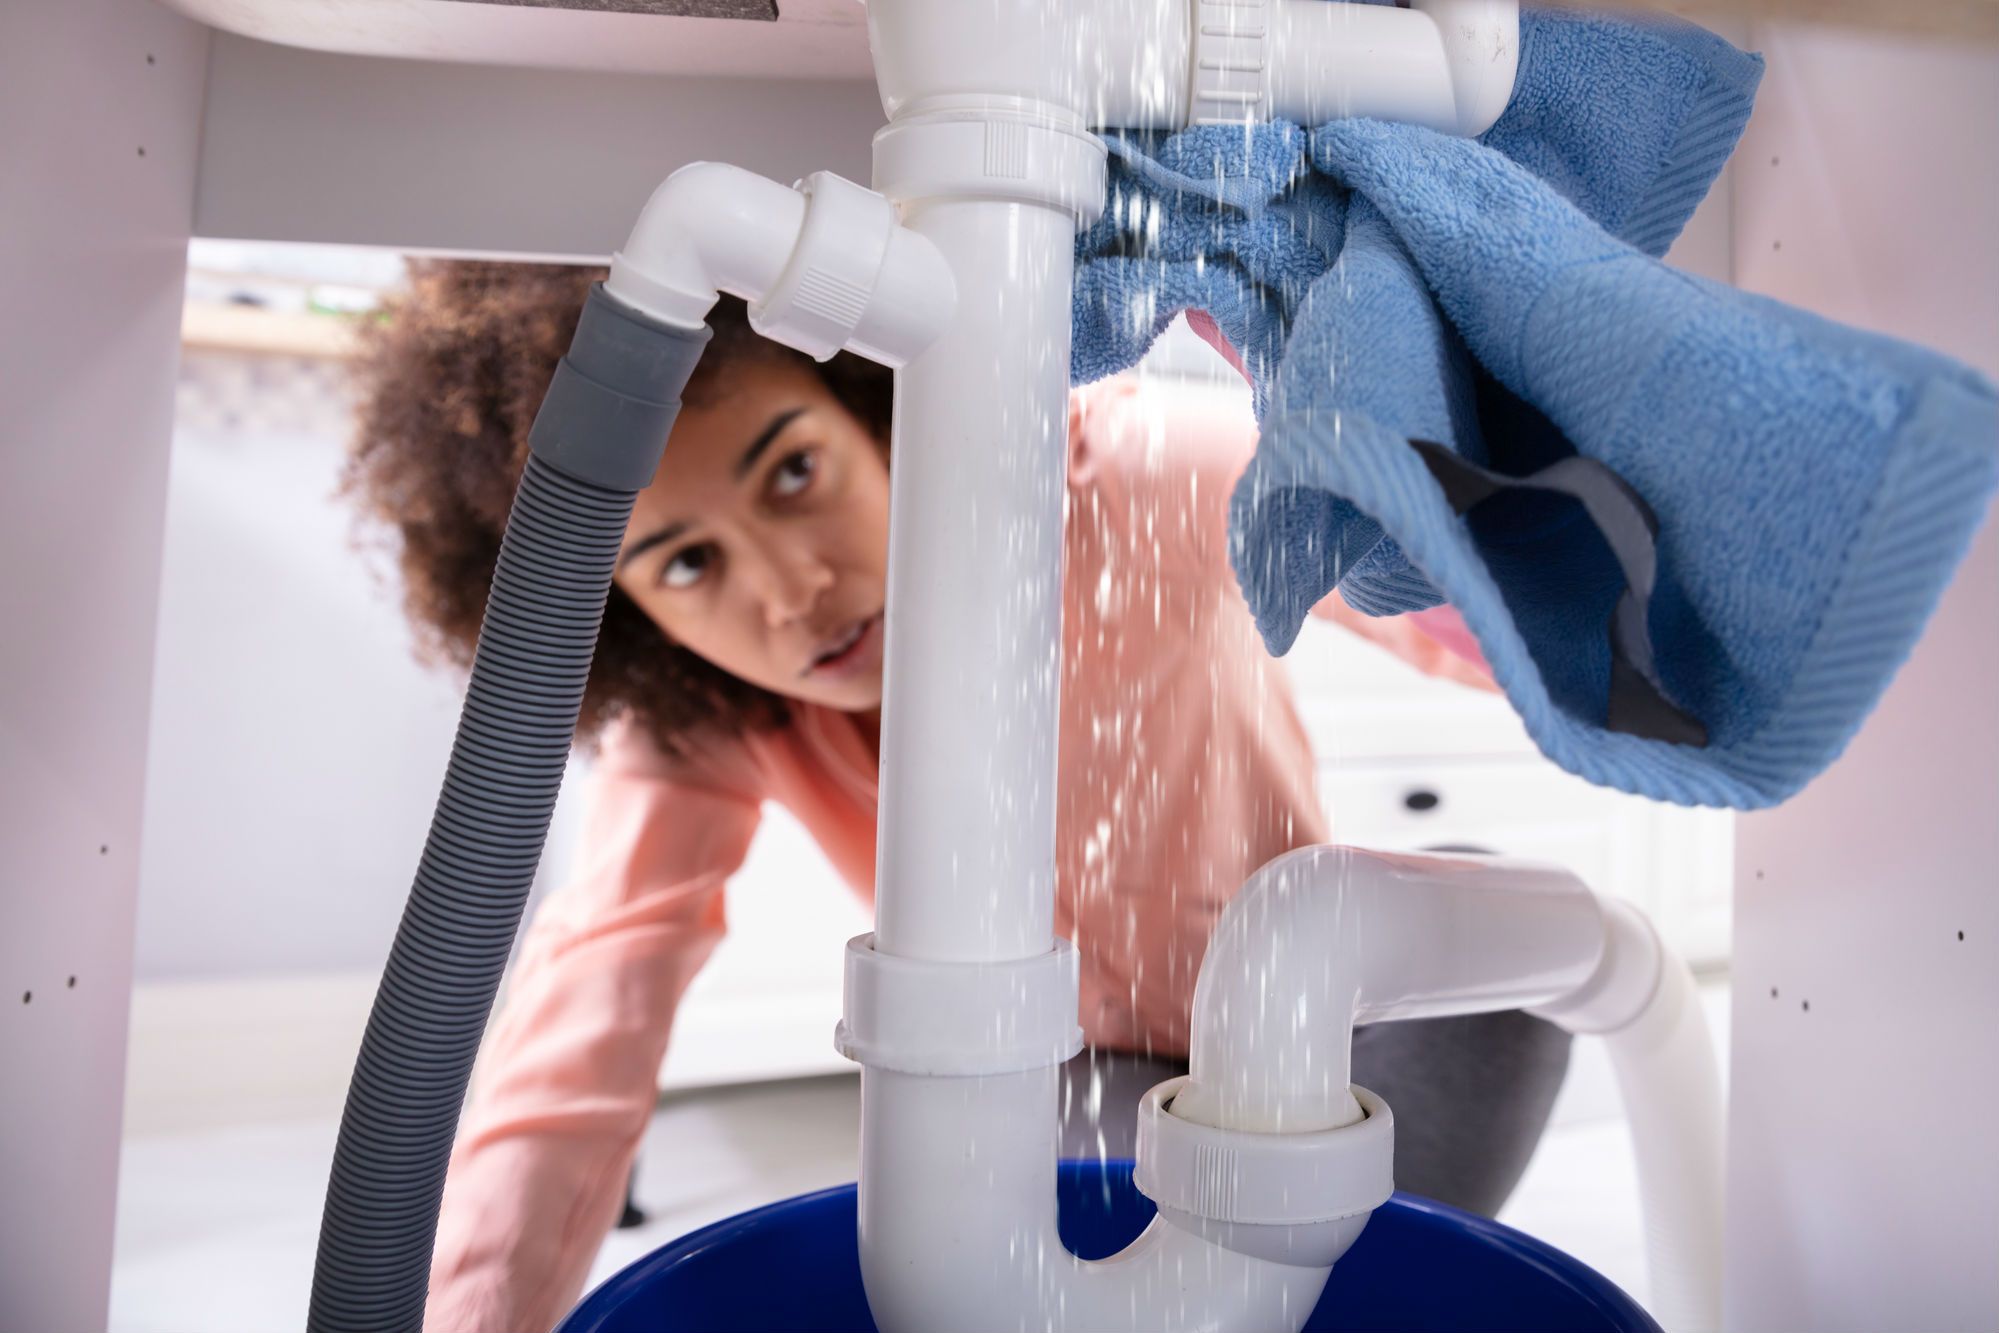 A woman fixes a leaky sink.